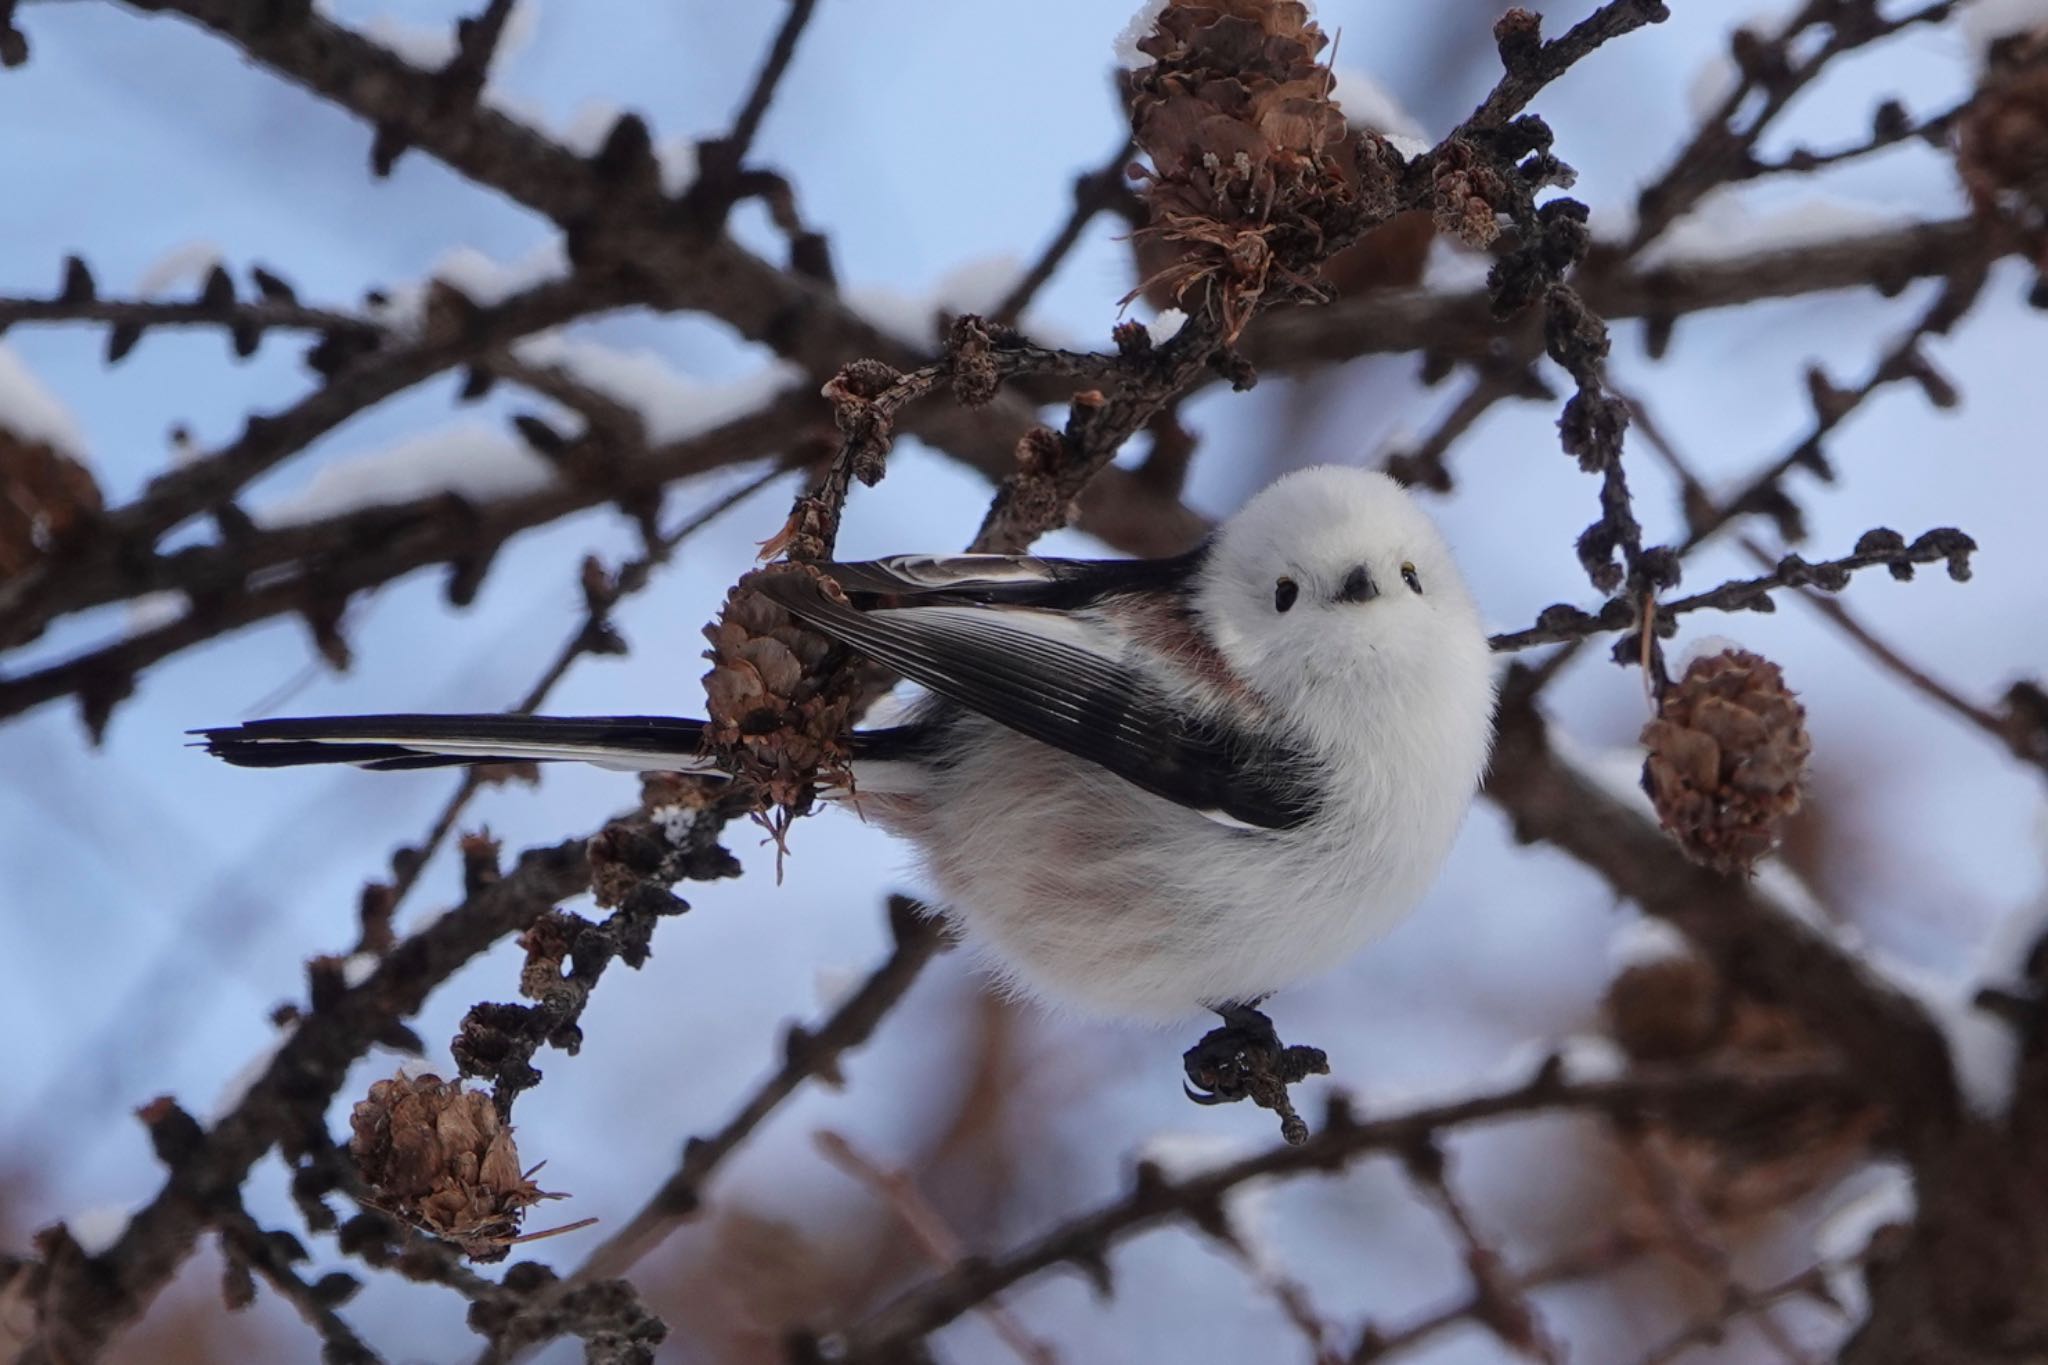 Photo of Long-tailed tit(japonicus) at Makomanai Park by ひじり